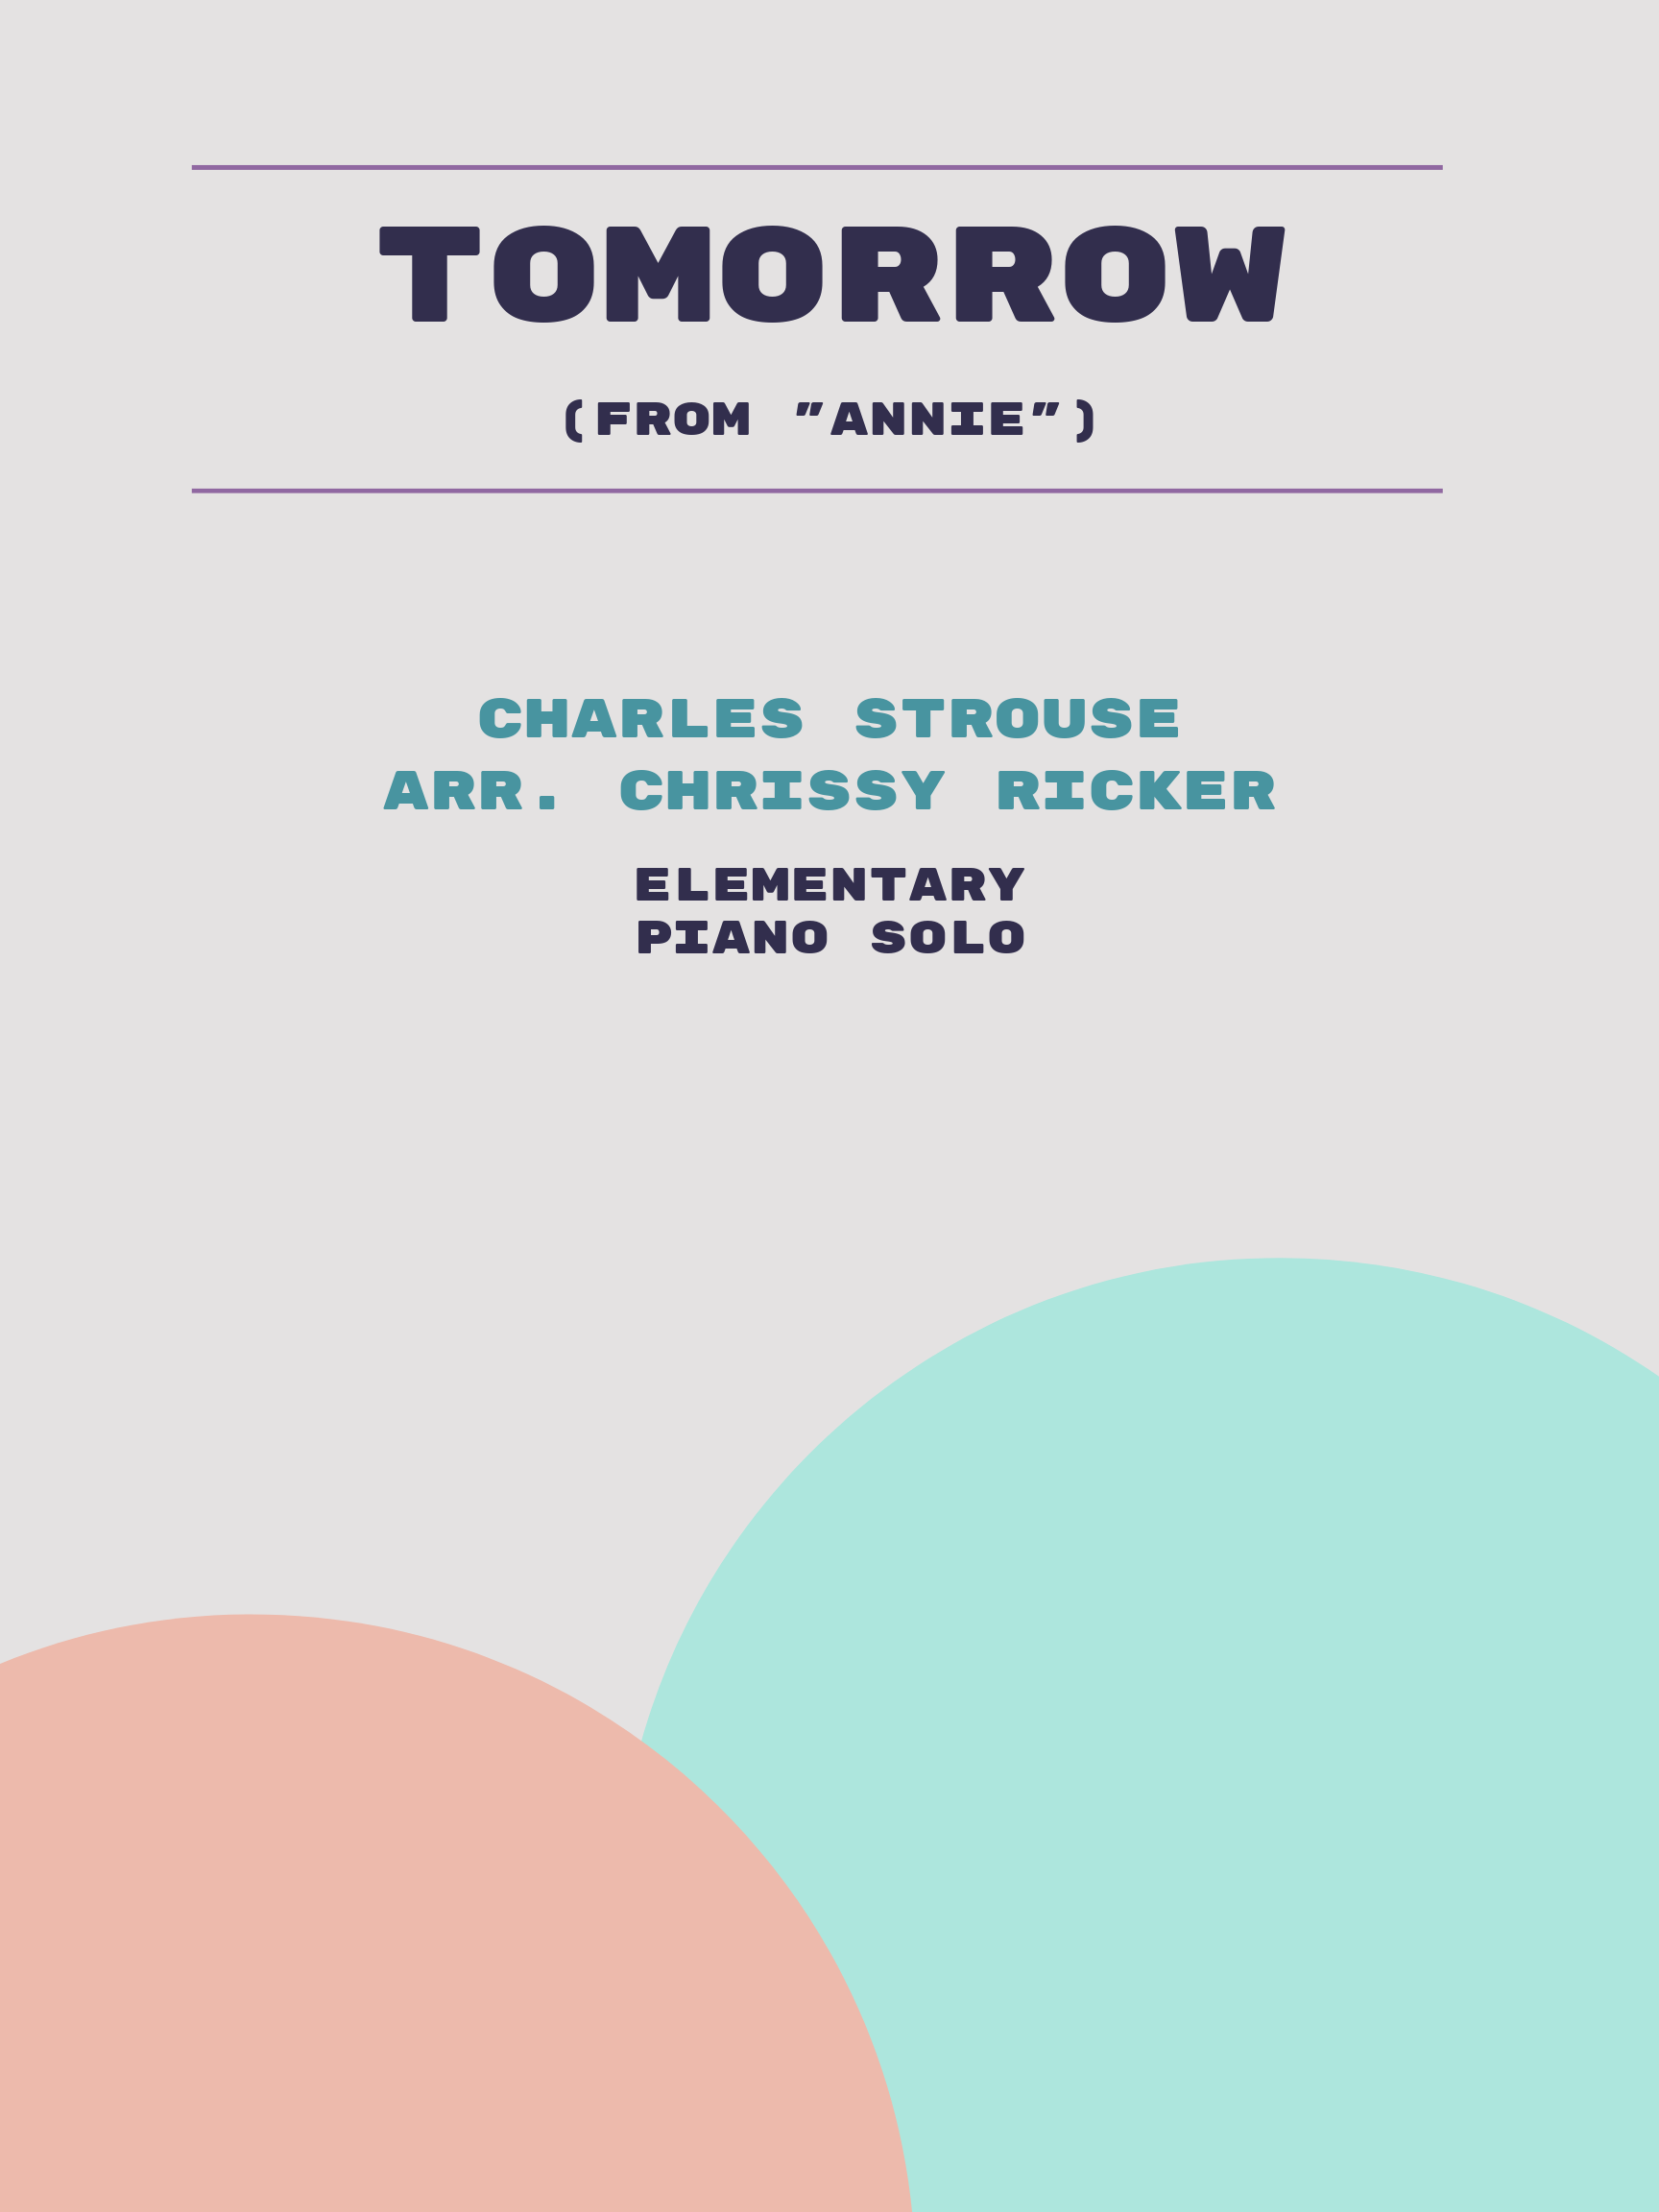 Tomorrow by Charles Strouse